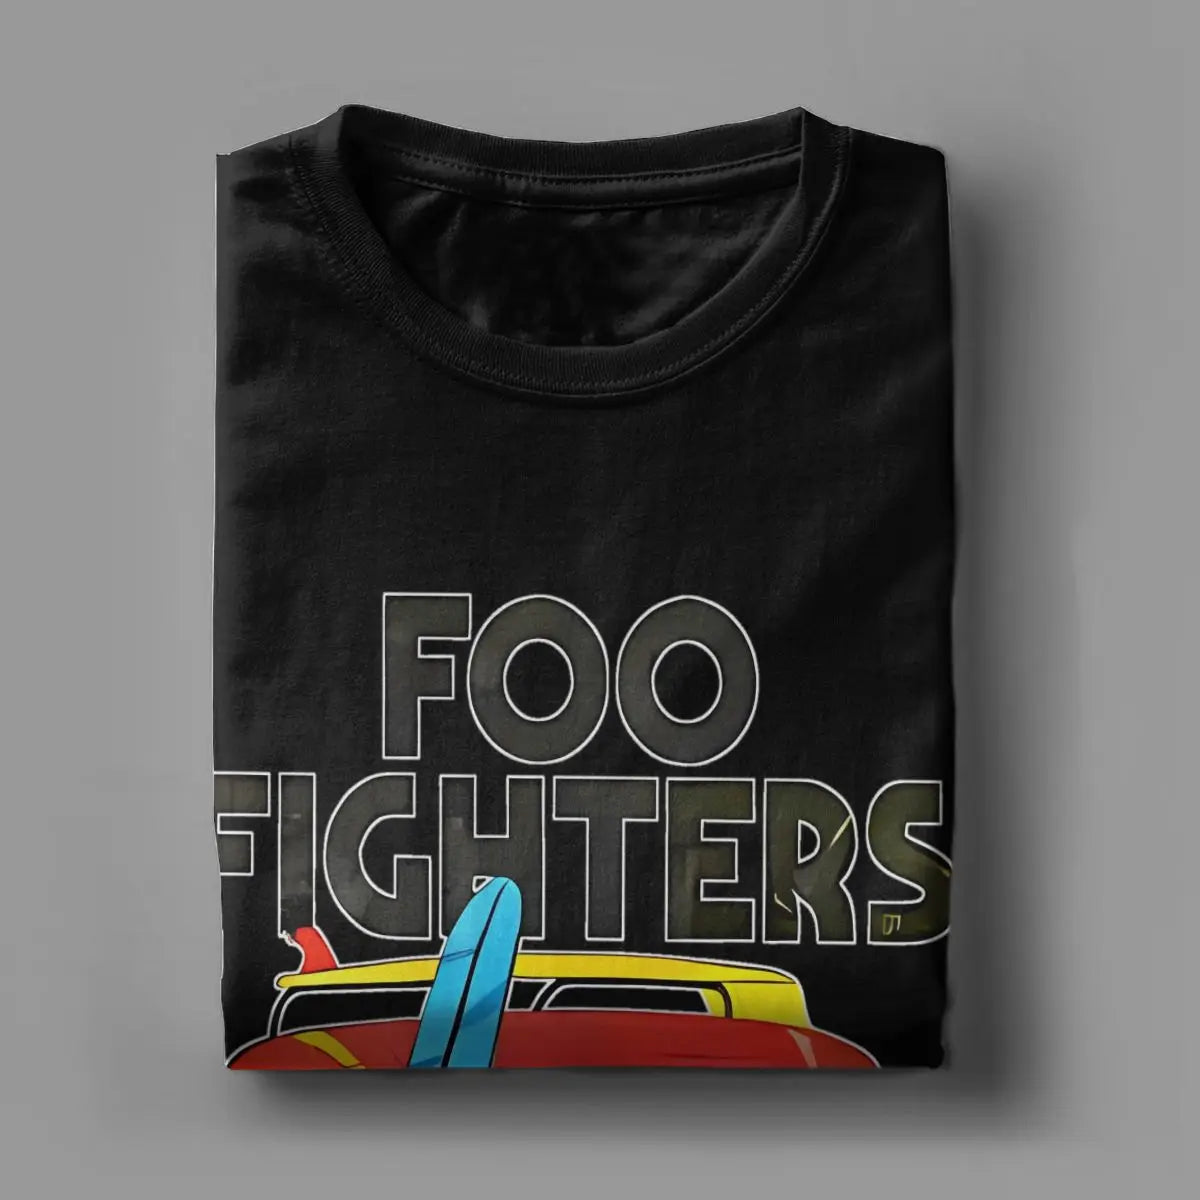 Summer Foo Fighters Rock Band T-Shirt - Men’s and Women’s Pure Cotton Funny Tees